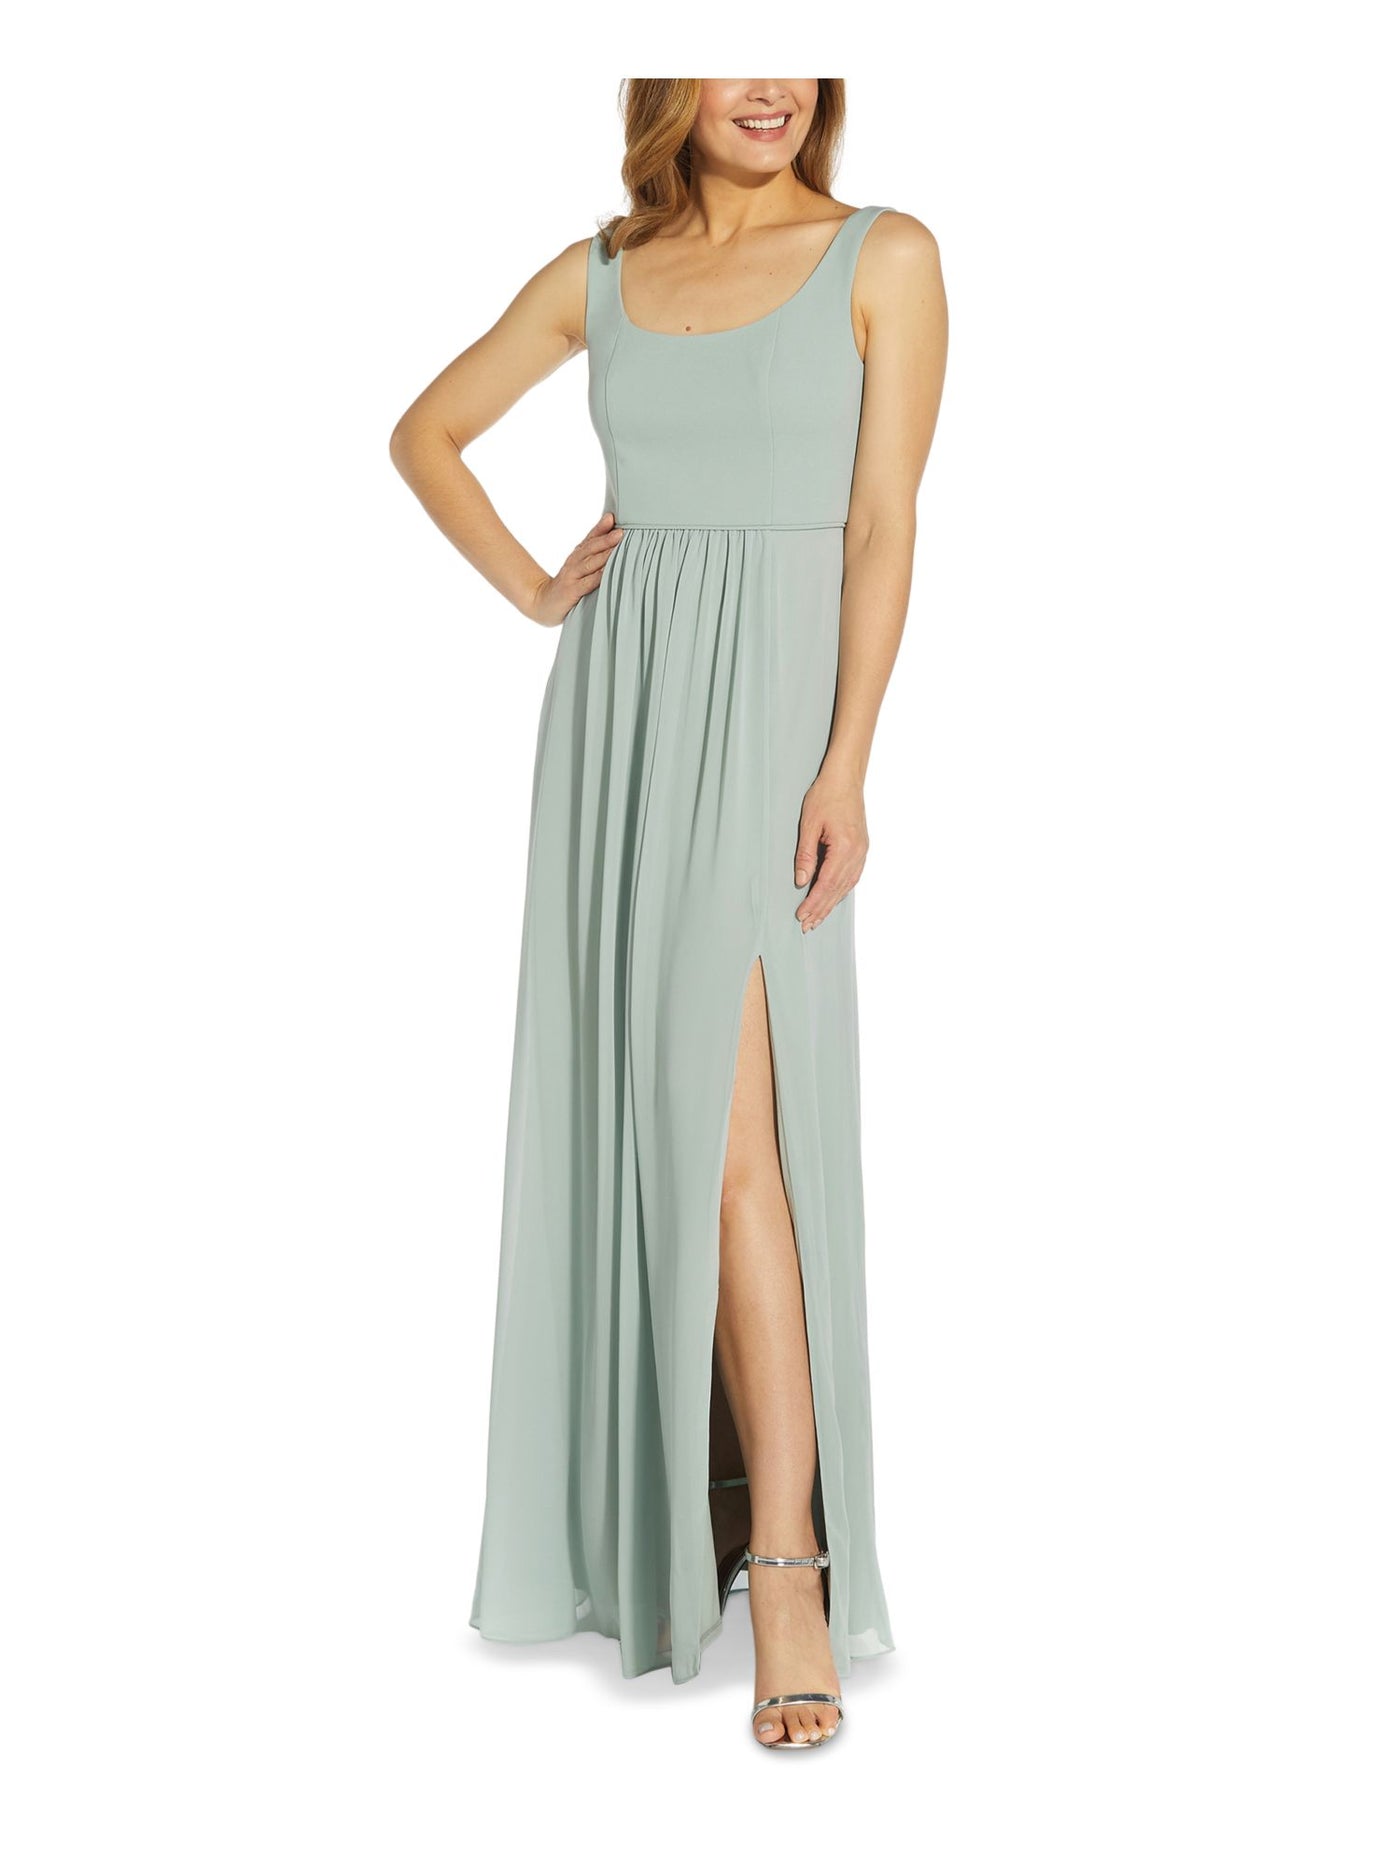 ADRIANNA PAPELL Womens Green Stretch Slitted Zippered Sheer Lined Sleeveless Square Neck Full-Length Evening Gown Dress 4